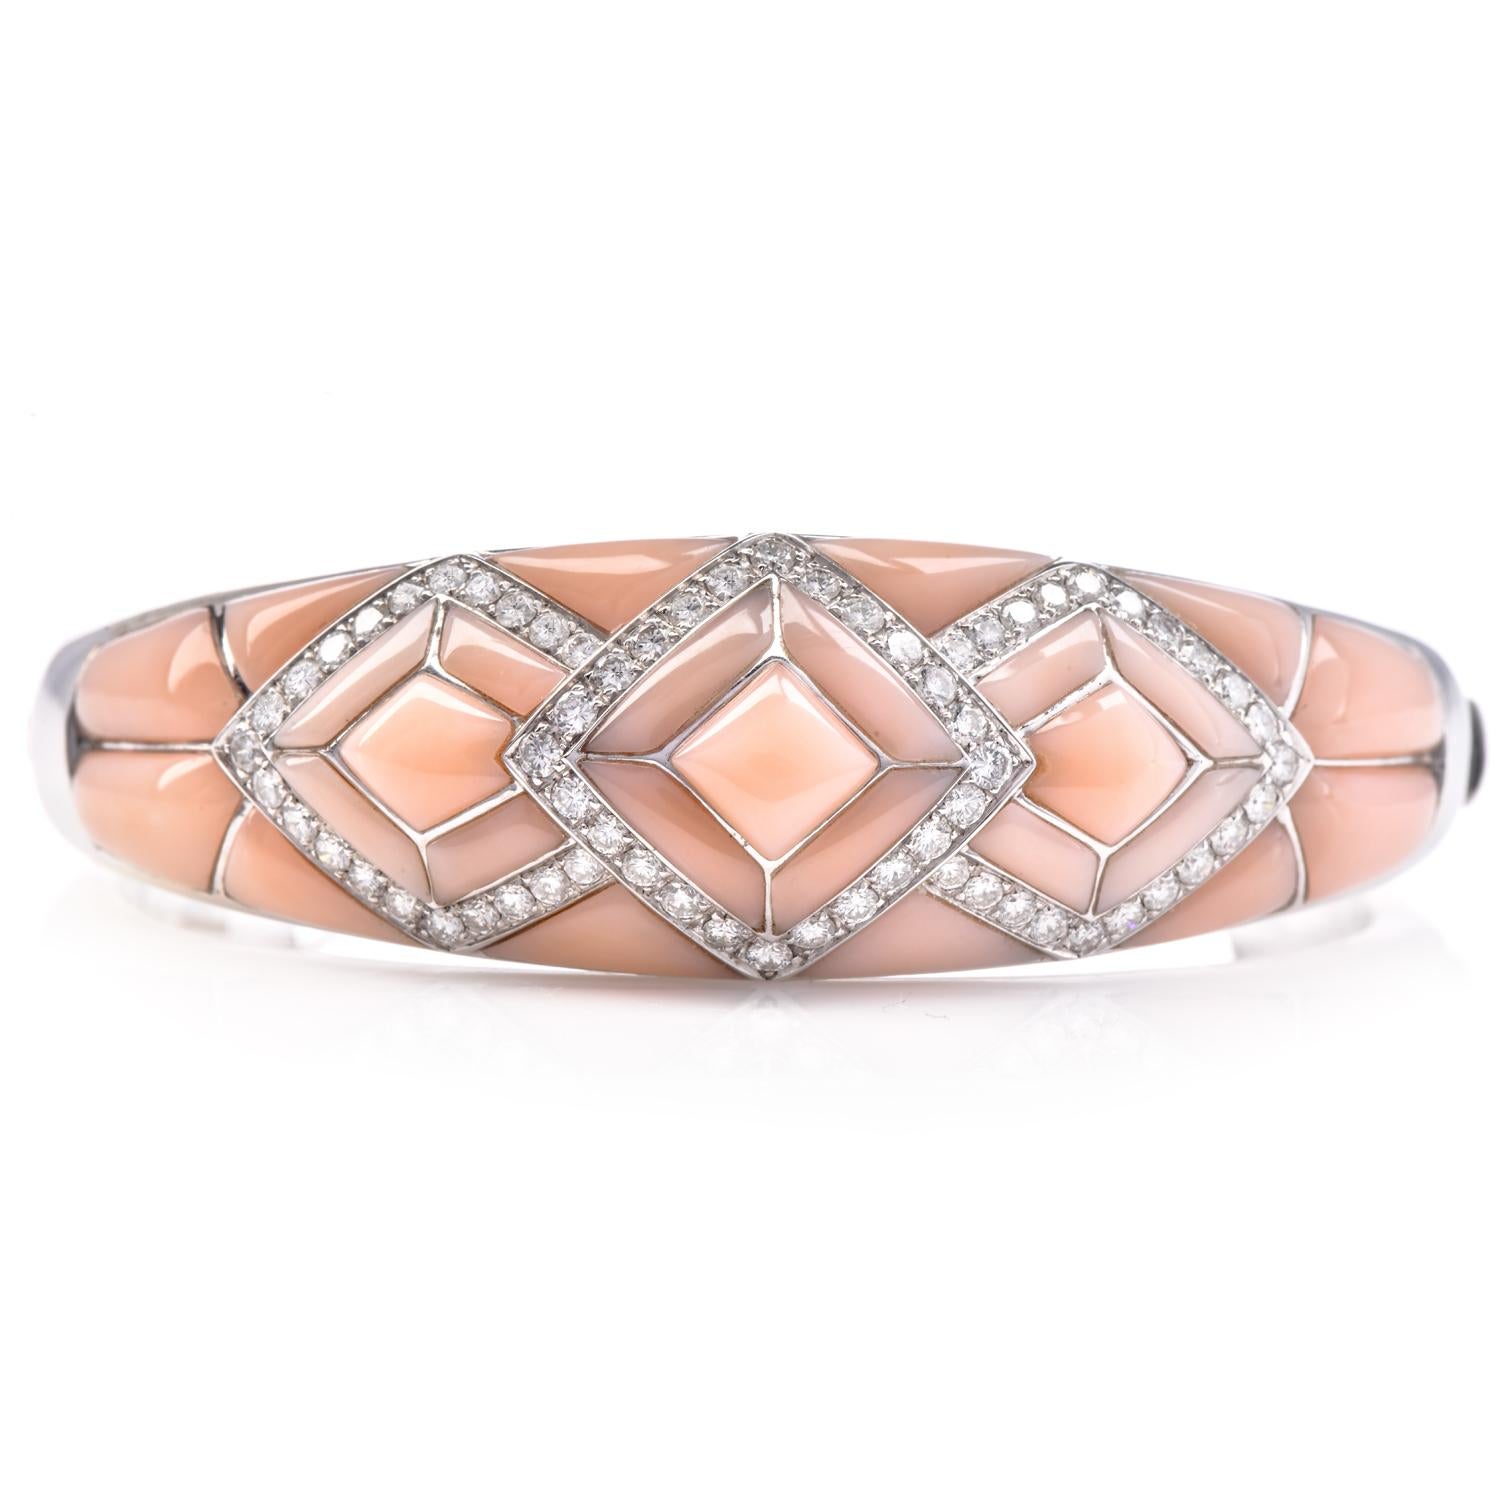 Introducing an alluring estate jewelry piece: a bangle bracelet featuring an elegant blend of coral and diamonds made in 18K White gold. The bracelet showcases a captivating pink coral inlay meticulously adorned with pave-set natural diamonds, all